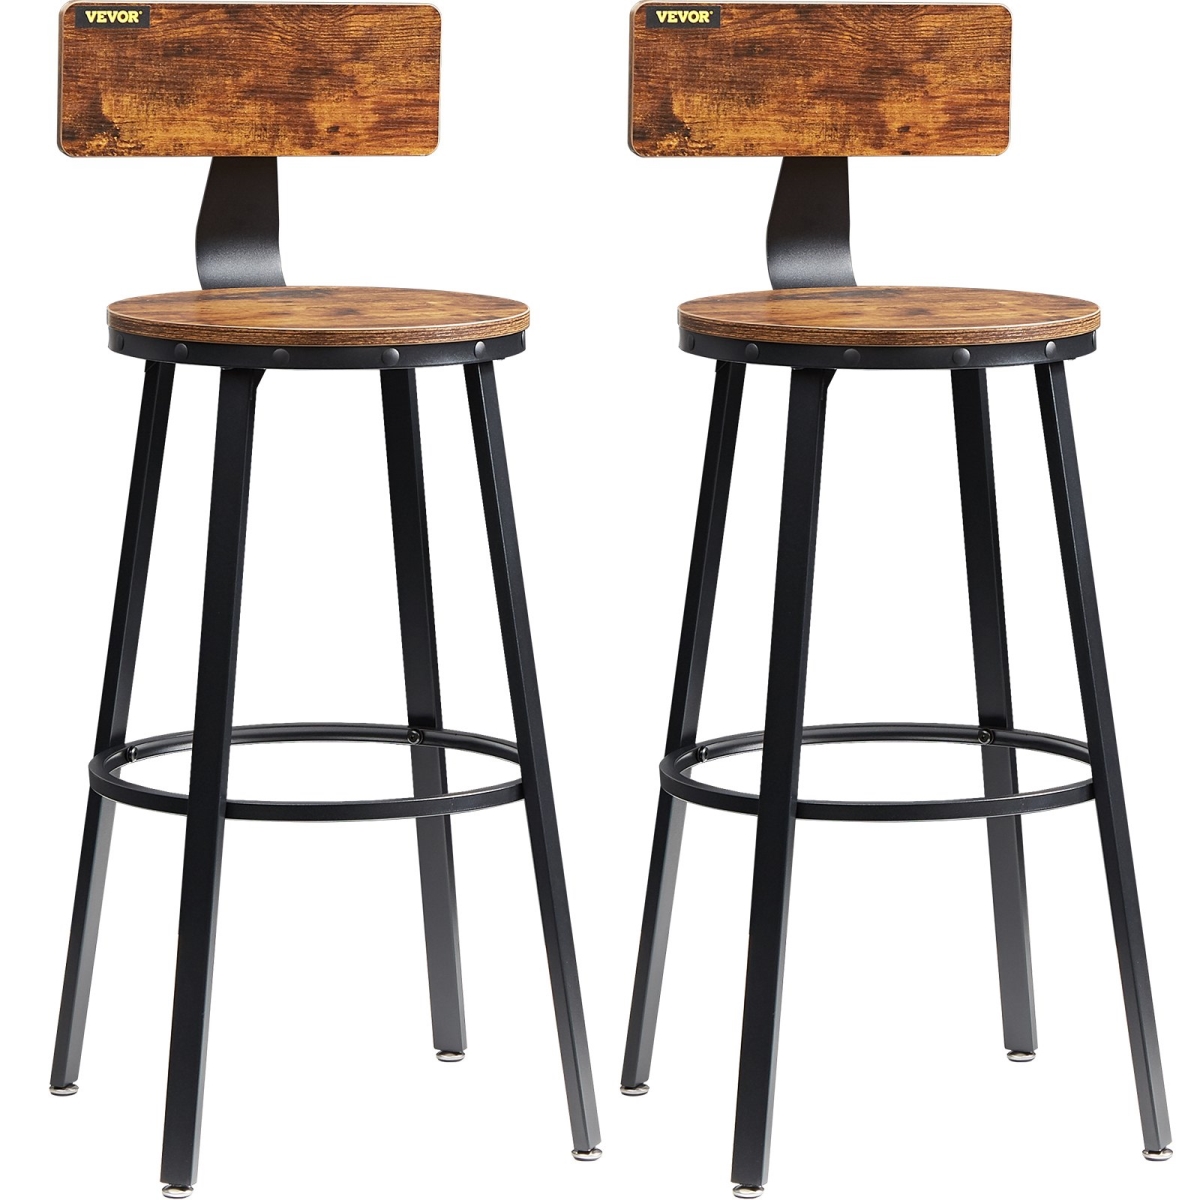 Picture of Vevor TMKBBTDYZDFGZTY7KV0 29 in. Rustic Bar Stools Counter Height Round Bar Chairs with Backrest - Set of 2